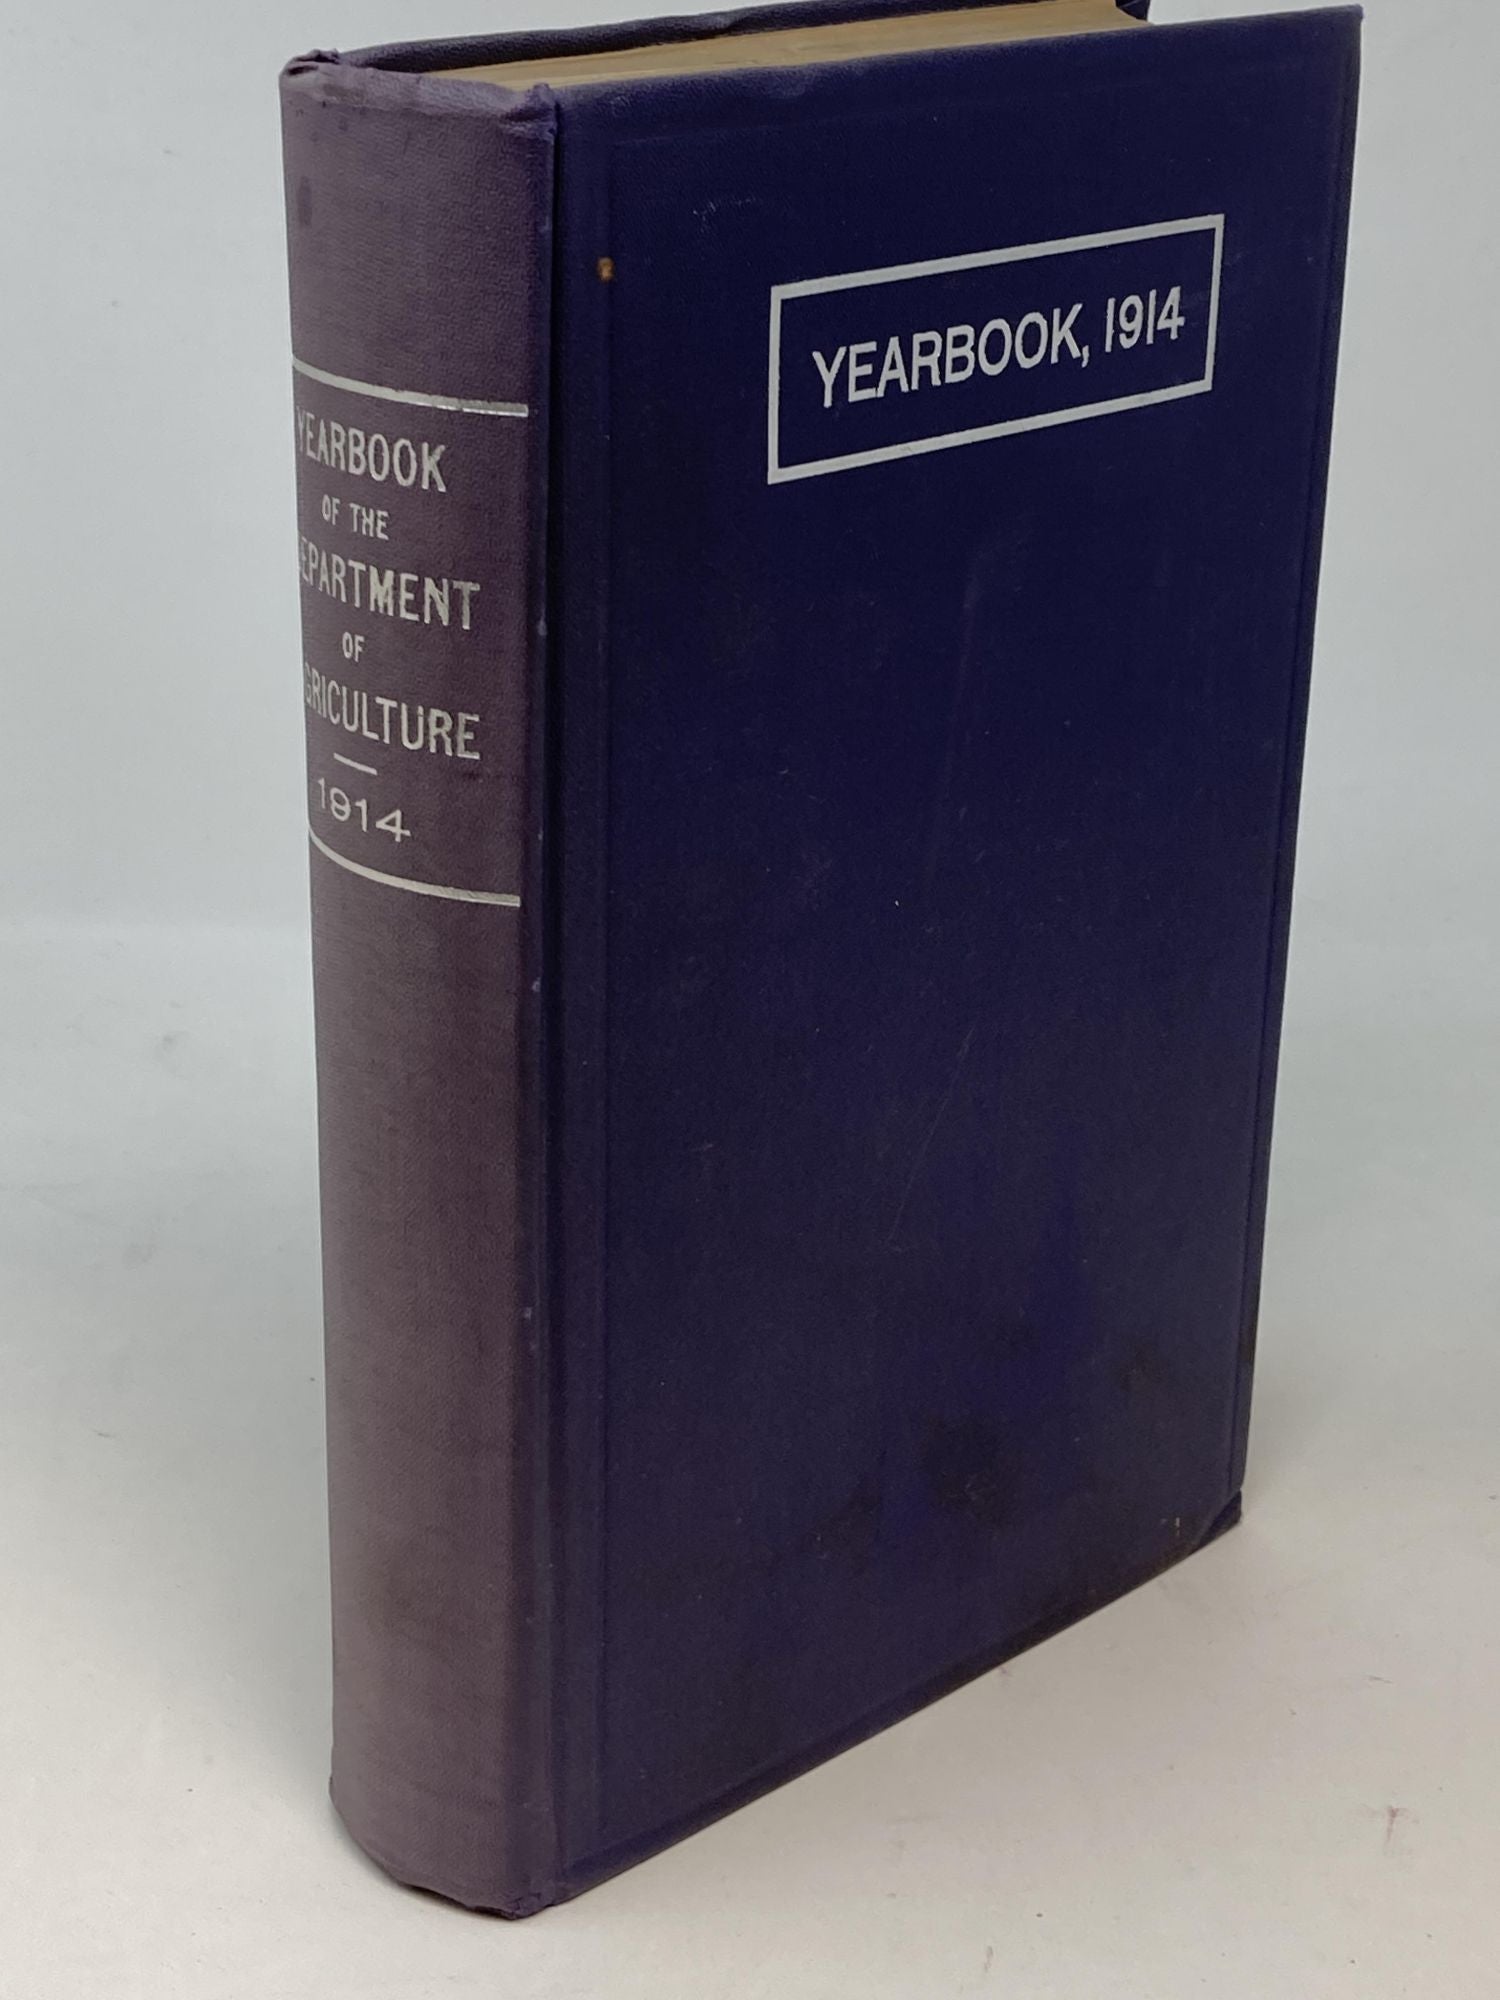 USDA - Yearbook of the United States Department of Agriculture - 1914